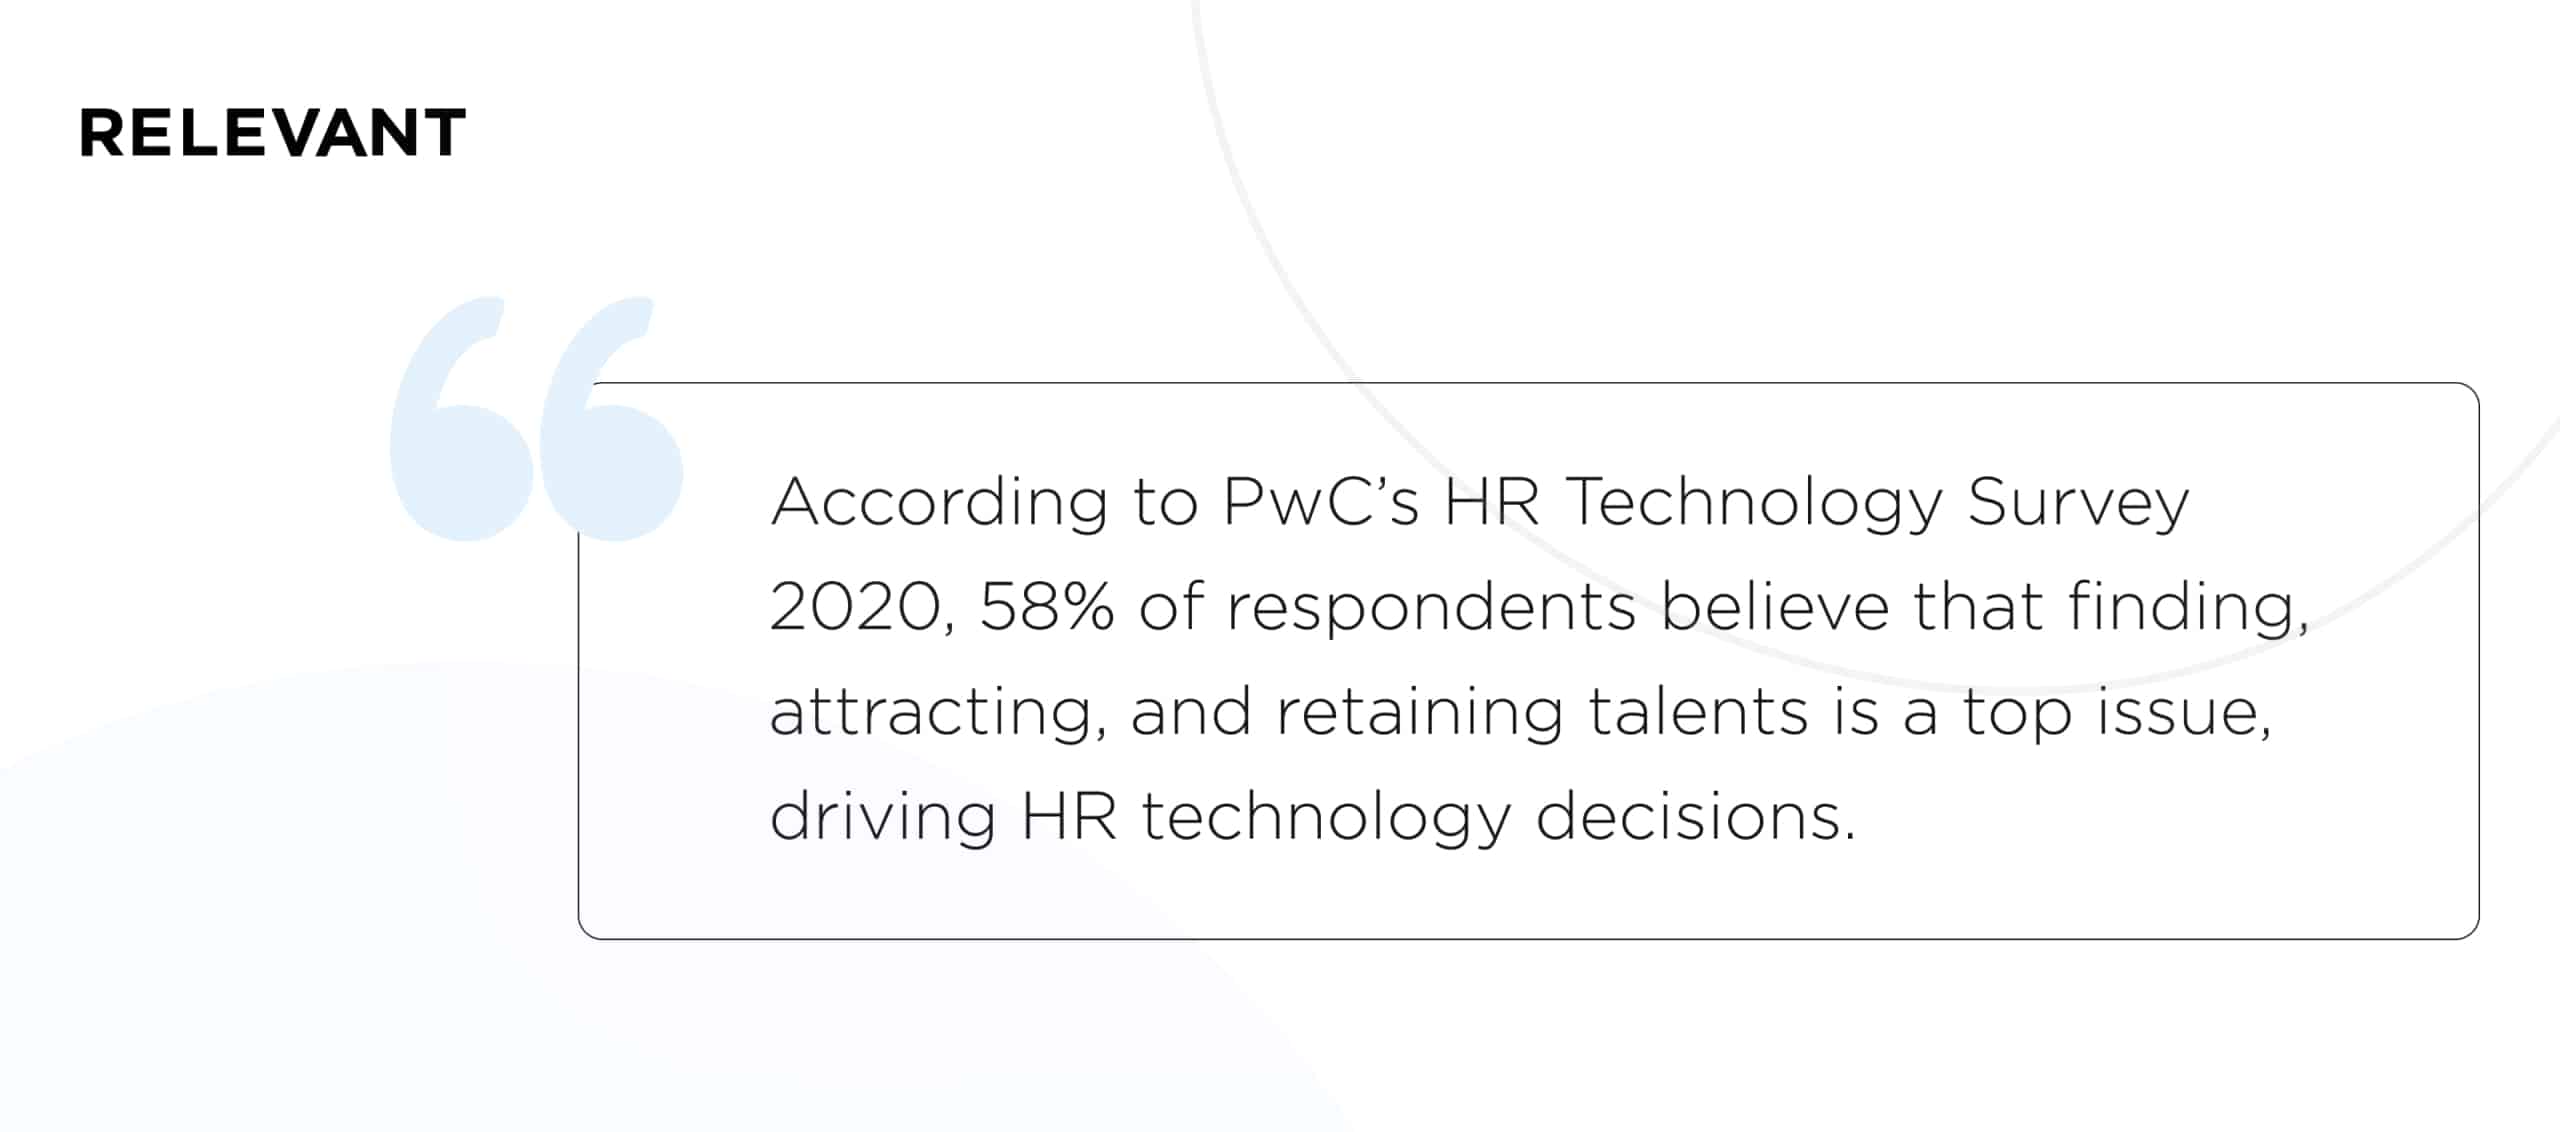 a top issue, driving HR technology decisions